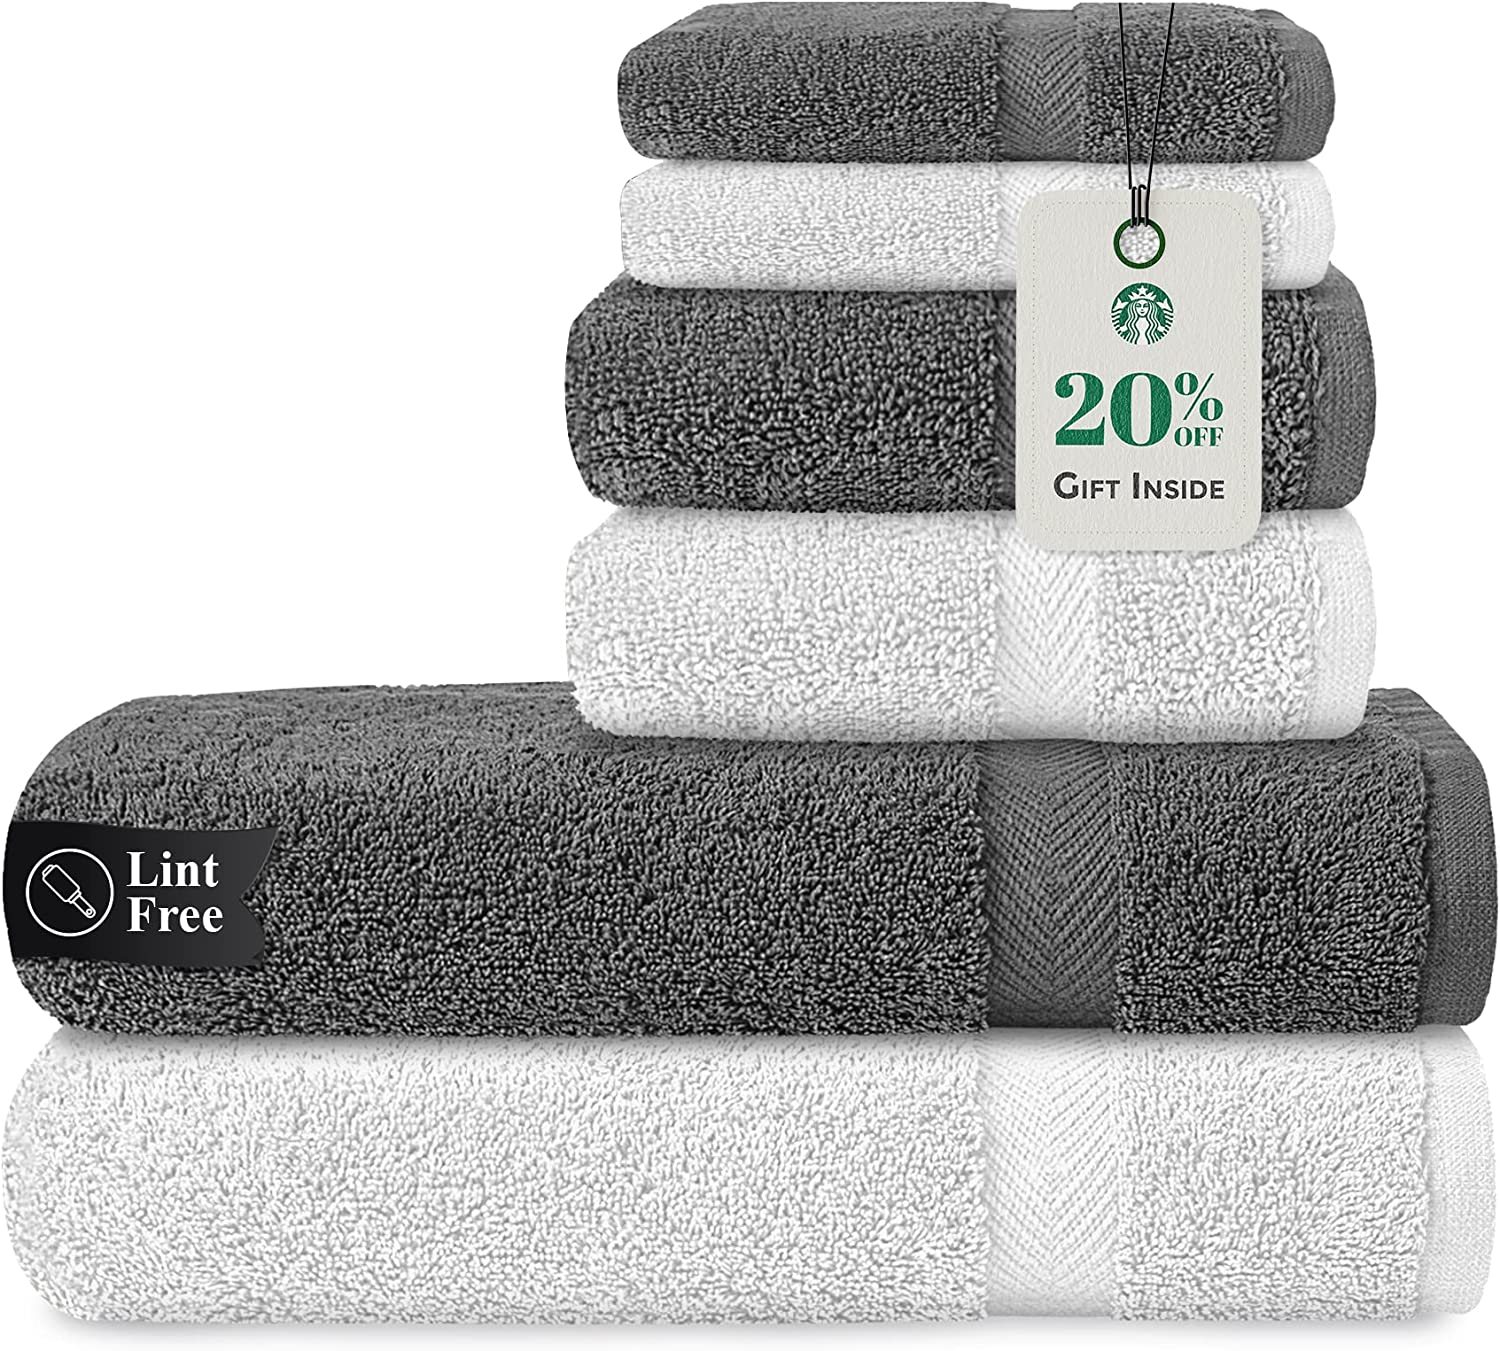 Stony Edge Towel Set, 2 Bath Towel, 2 Hand Towel & 2 Face Towels, 100% Cotton, 600 GSM, Soft & Absorbent for Bathroom, Kitchen, Gym & Spa, White & Maroon